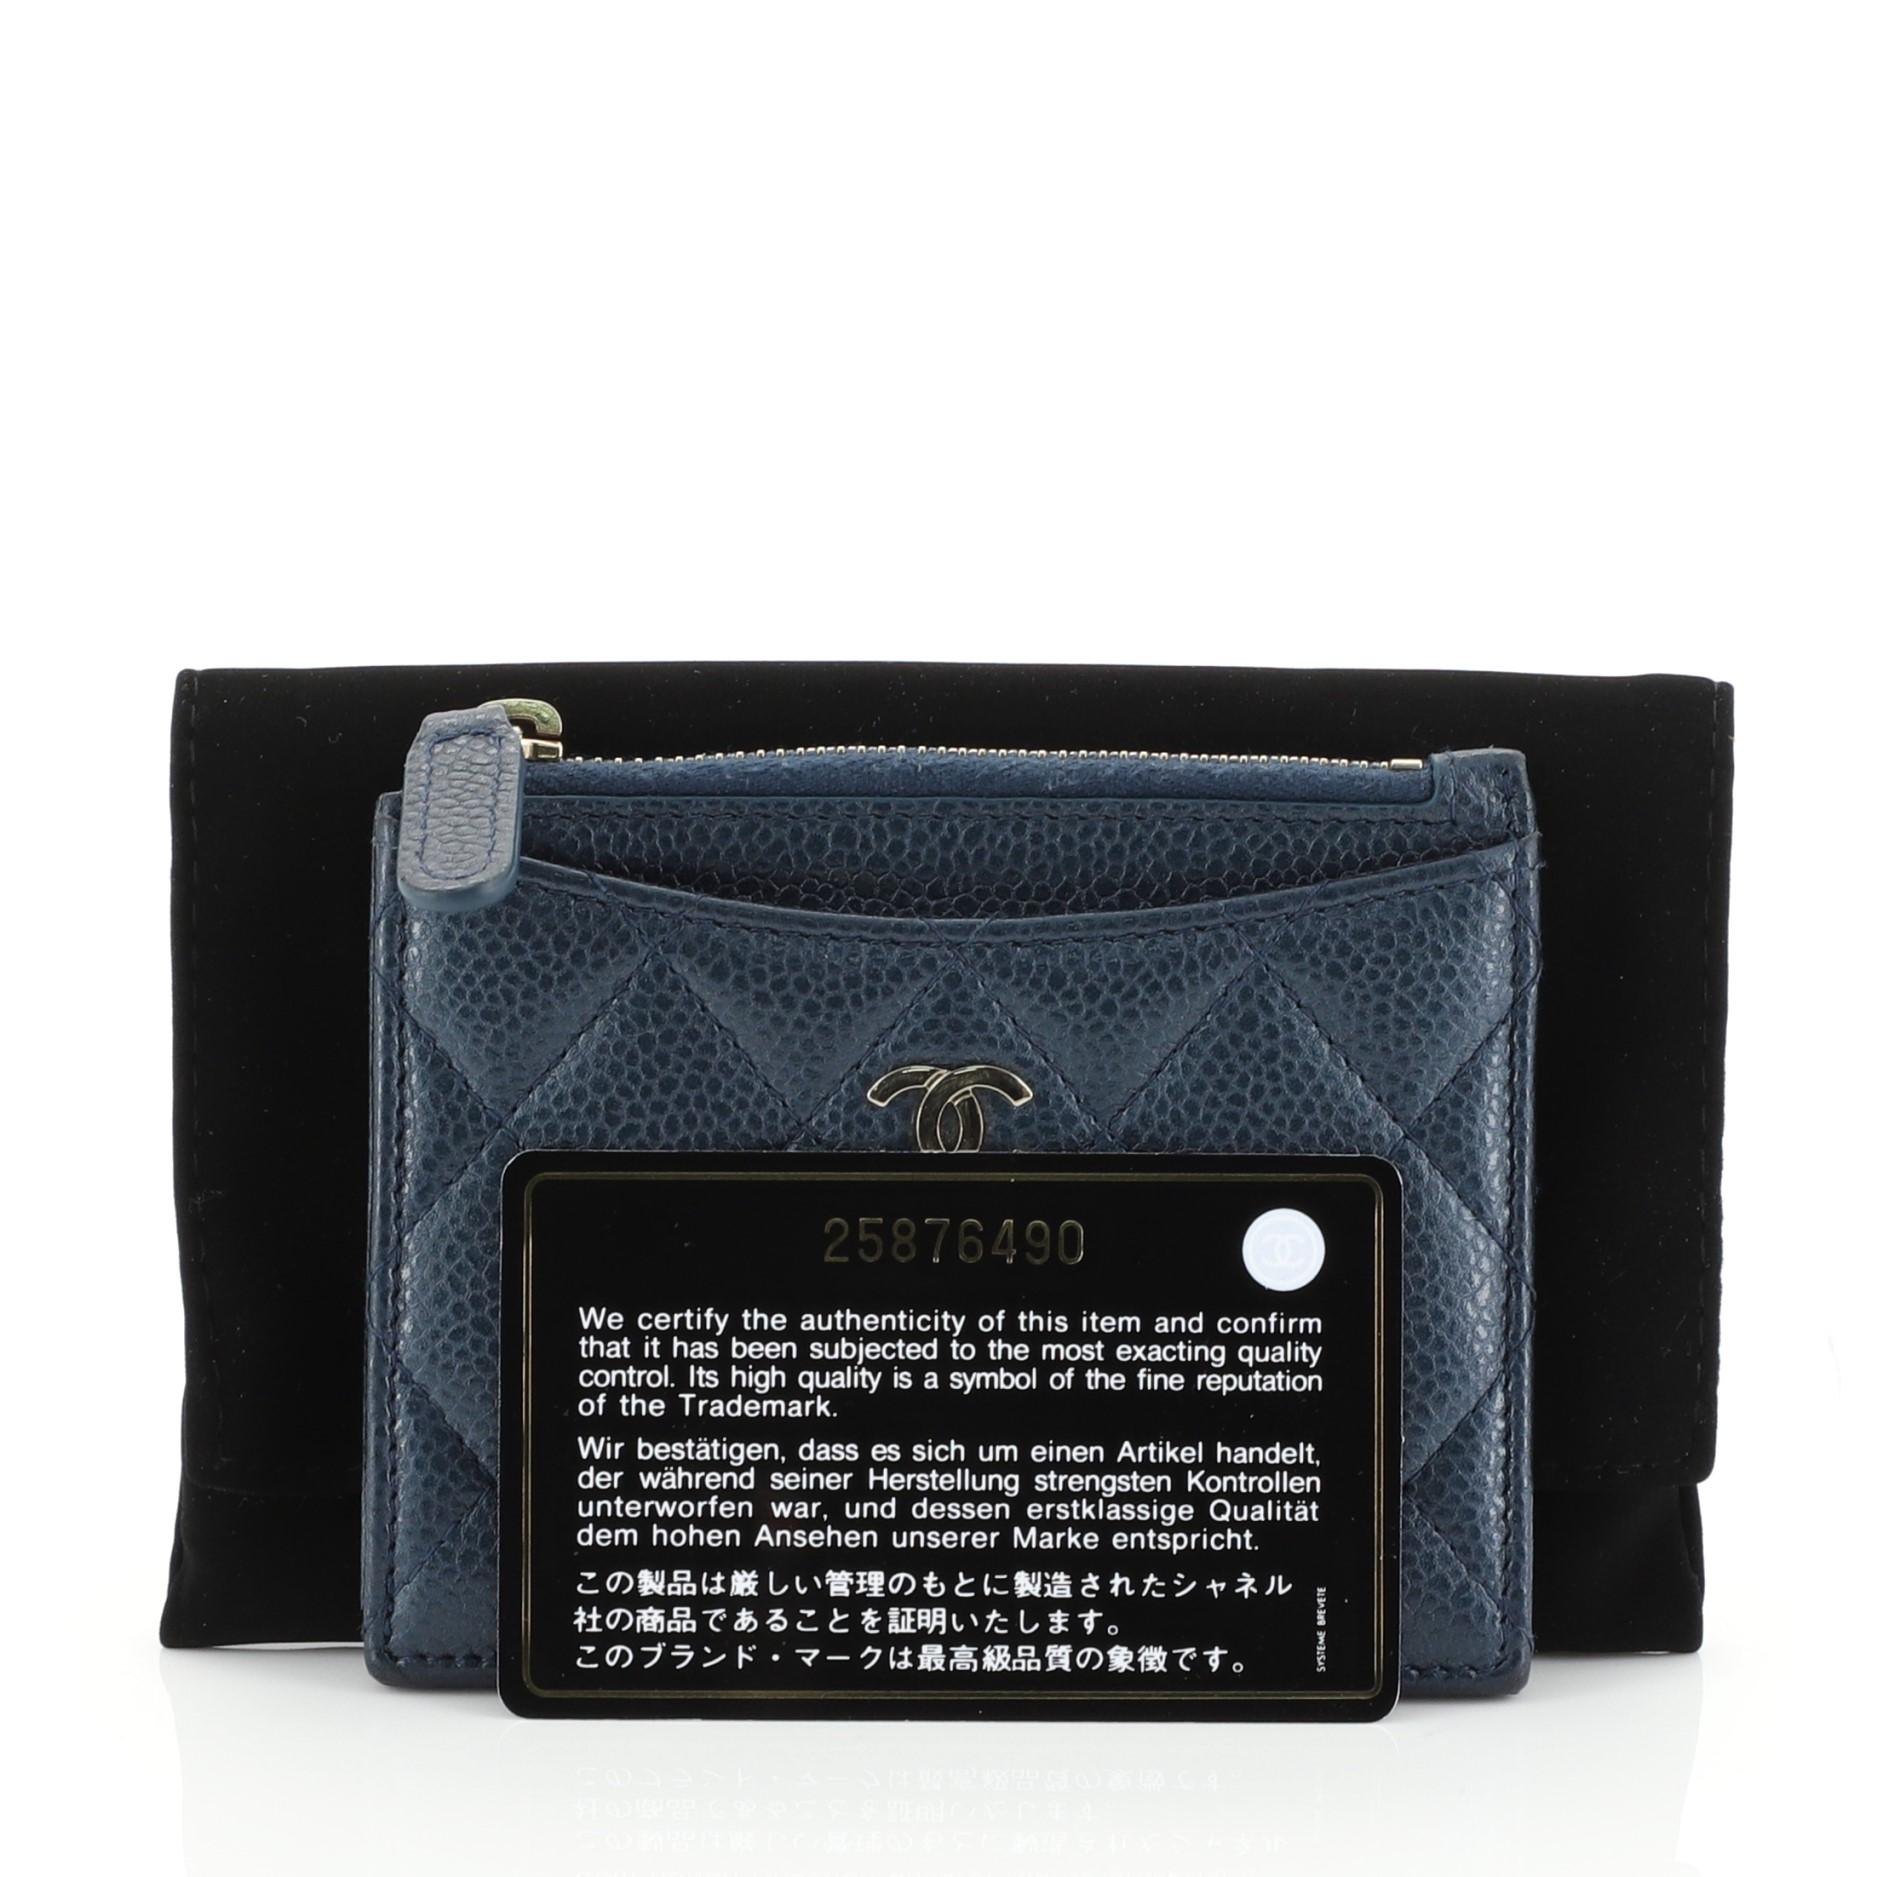 This Chanel CC Zip Card Holder Quilted Caviar, crafted from blue quilted caviar leather, features exterior slip pockets, CC logo and gold-tone hardware. Its zip closure opens to a blue fabric interior. Hologram sticker reads: 25876490. 

Estimated